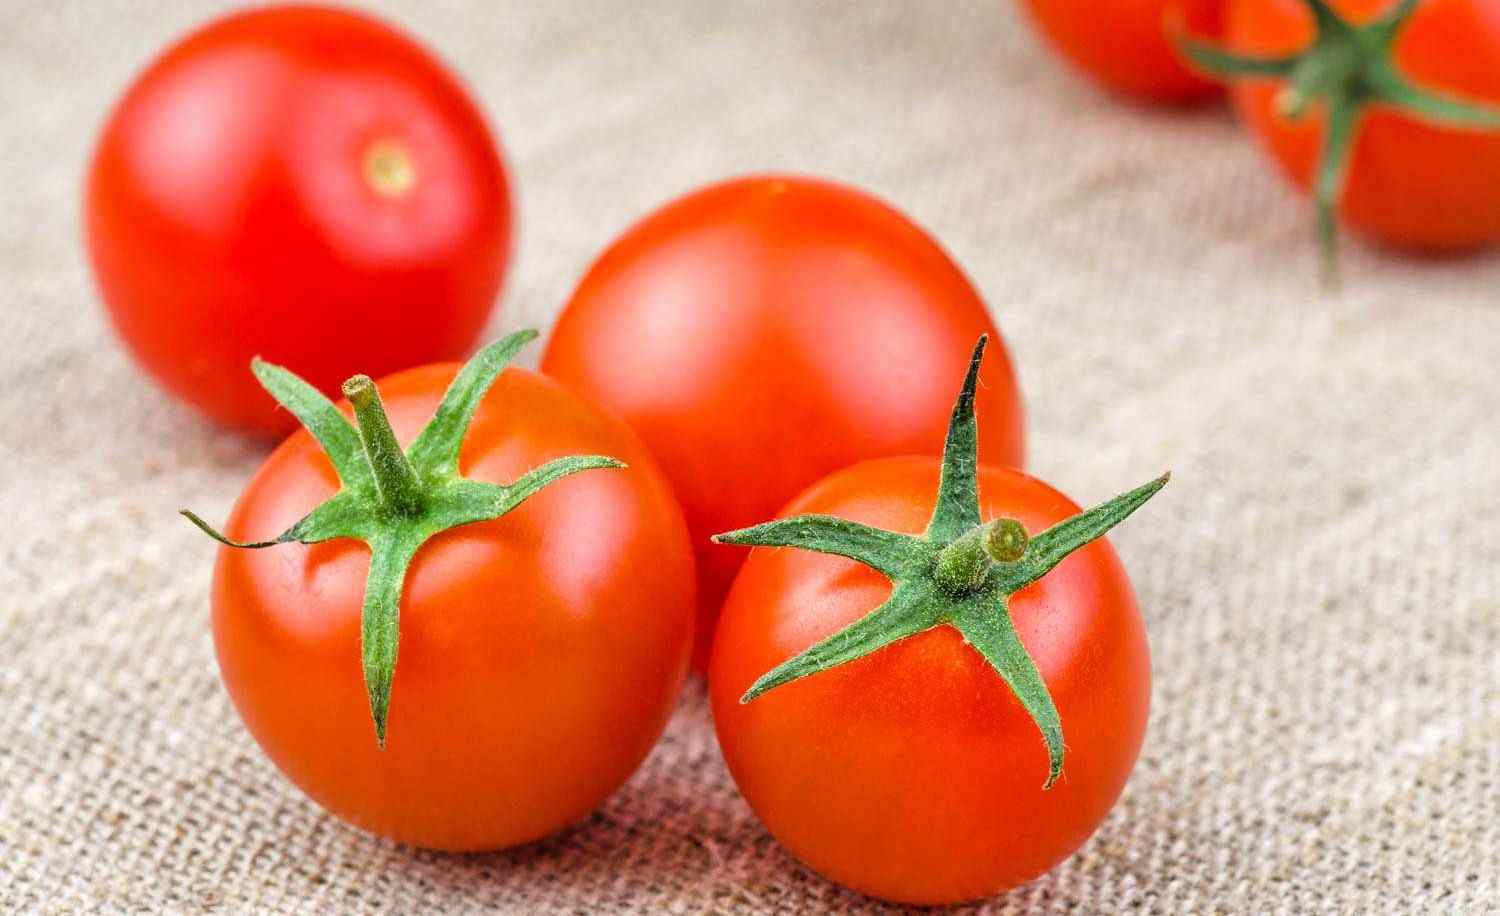  Buy All Kinds of cooked tomatoes At The Best Price 